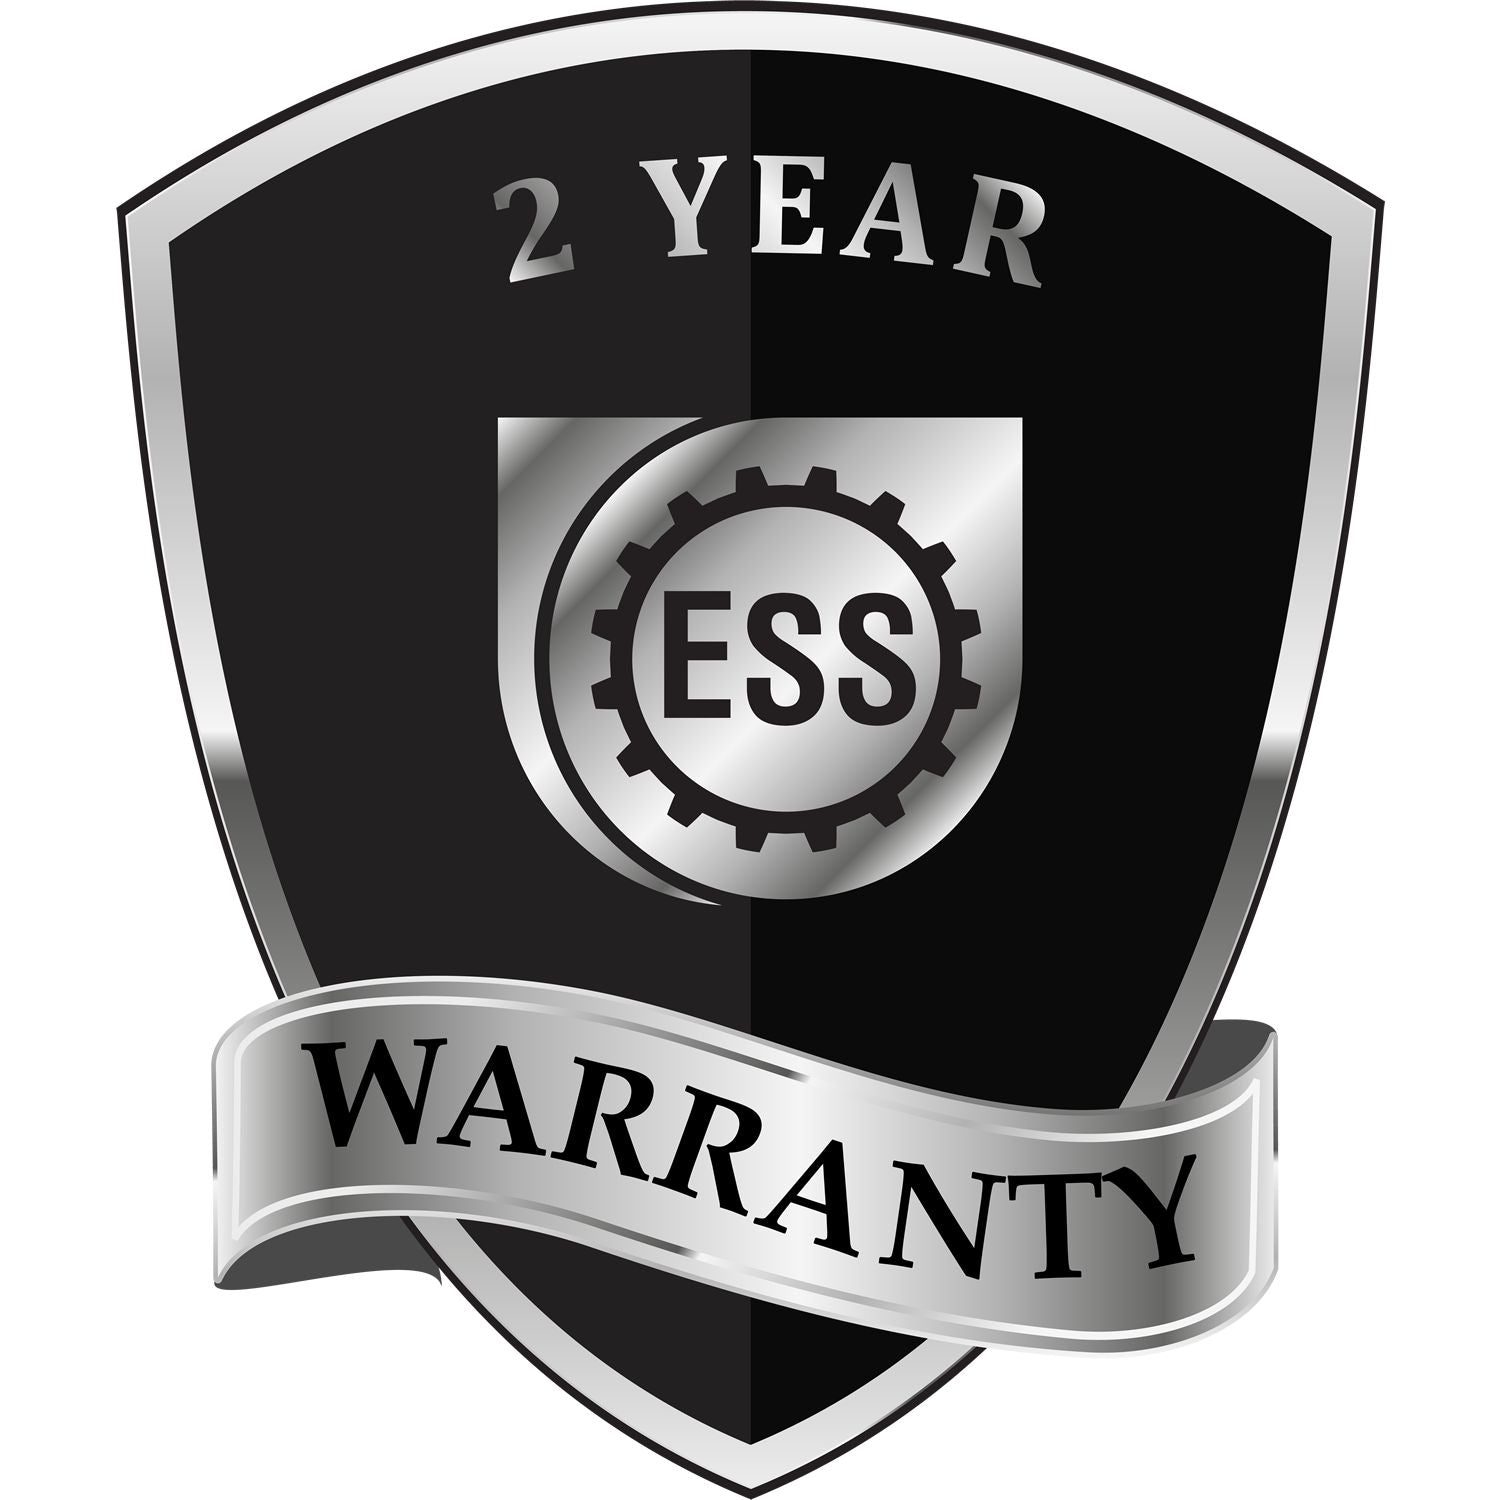 A badge or emblem showing a warranty icon for the Extended Long Reach New Mexico Surveyor Embosser